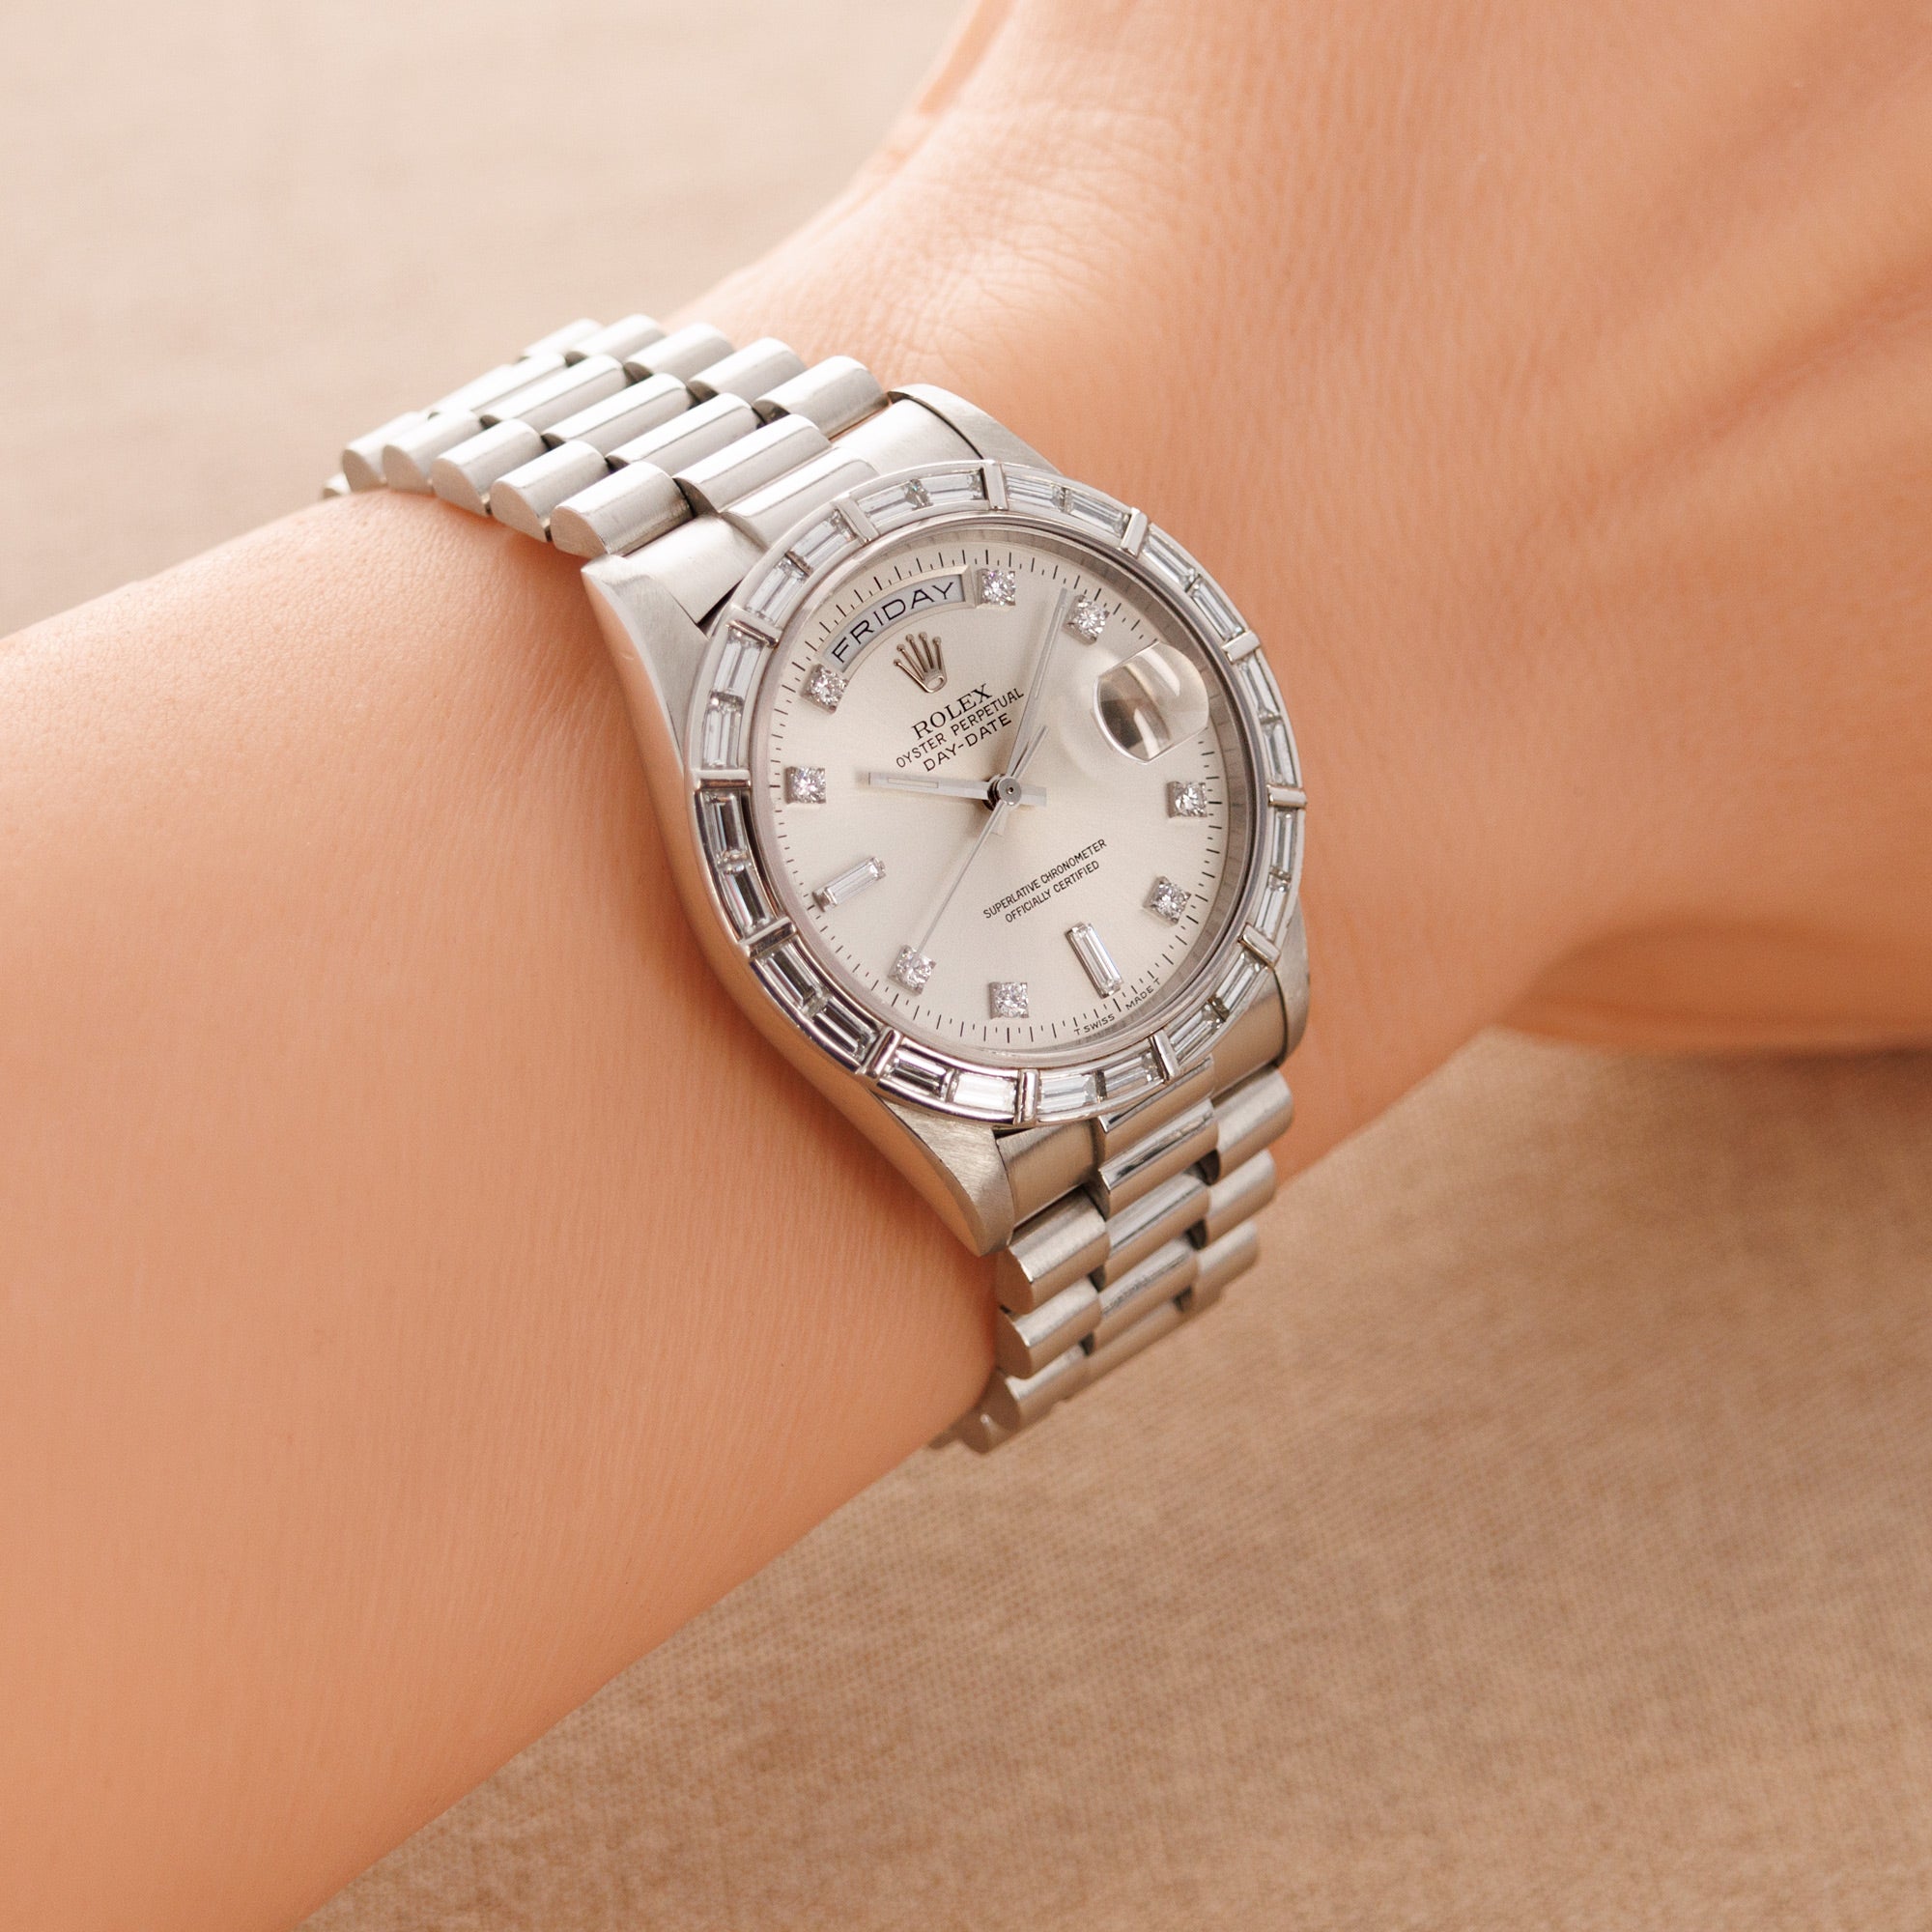 Rolex - Rolex Platinum Day-Date Ref. 18366 with Baguette Diamonds - The Keystone Watches